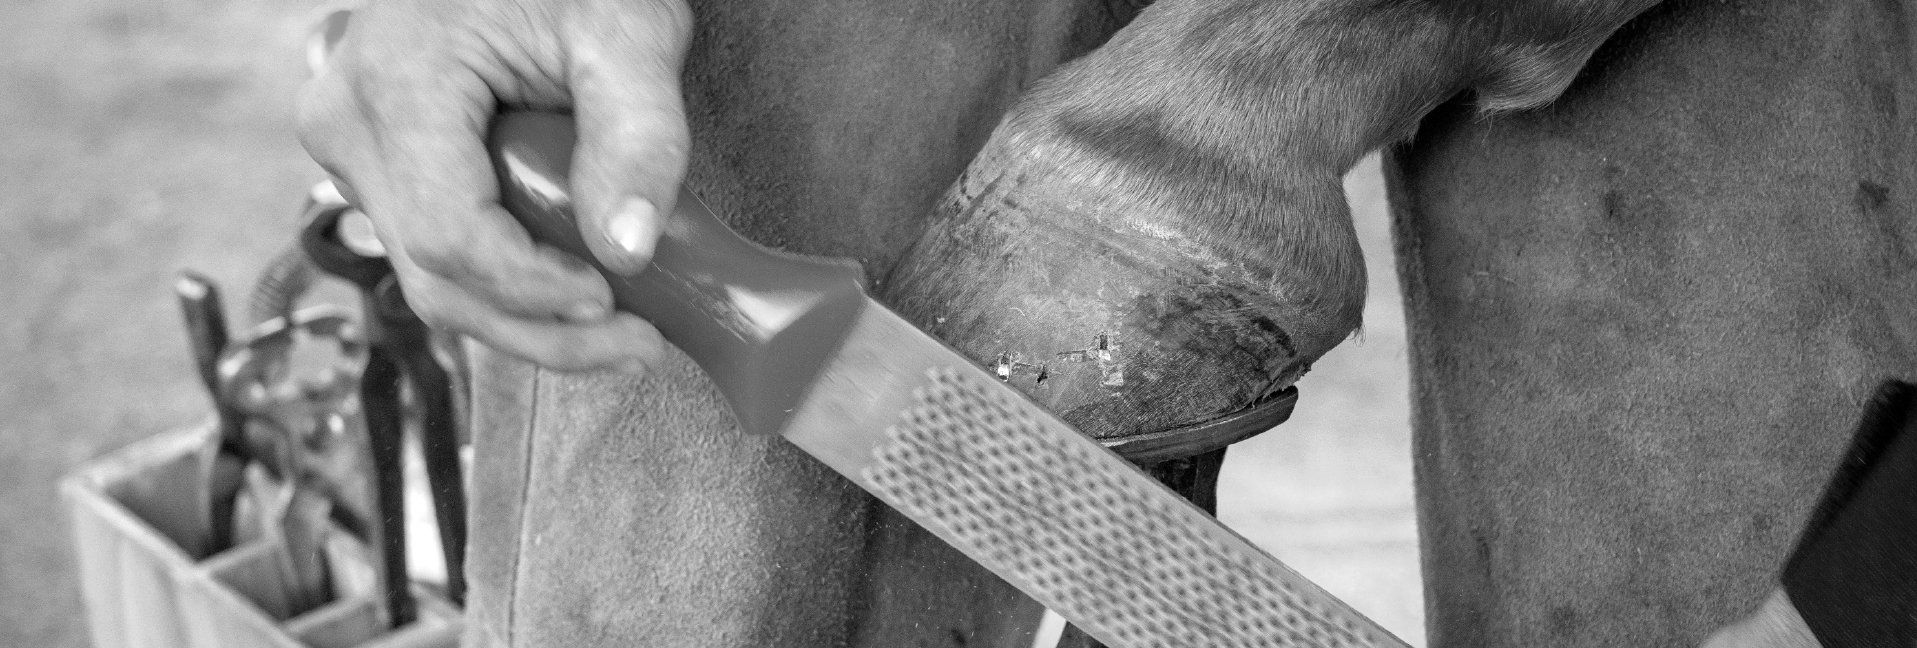 7 questions to ask your farrier